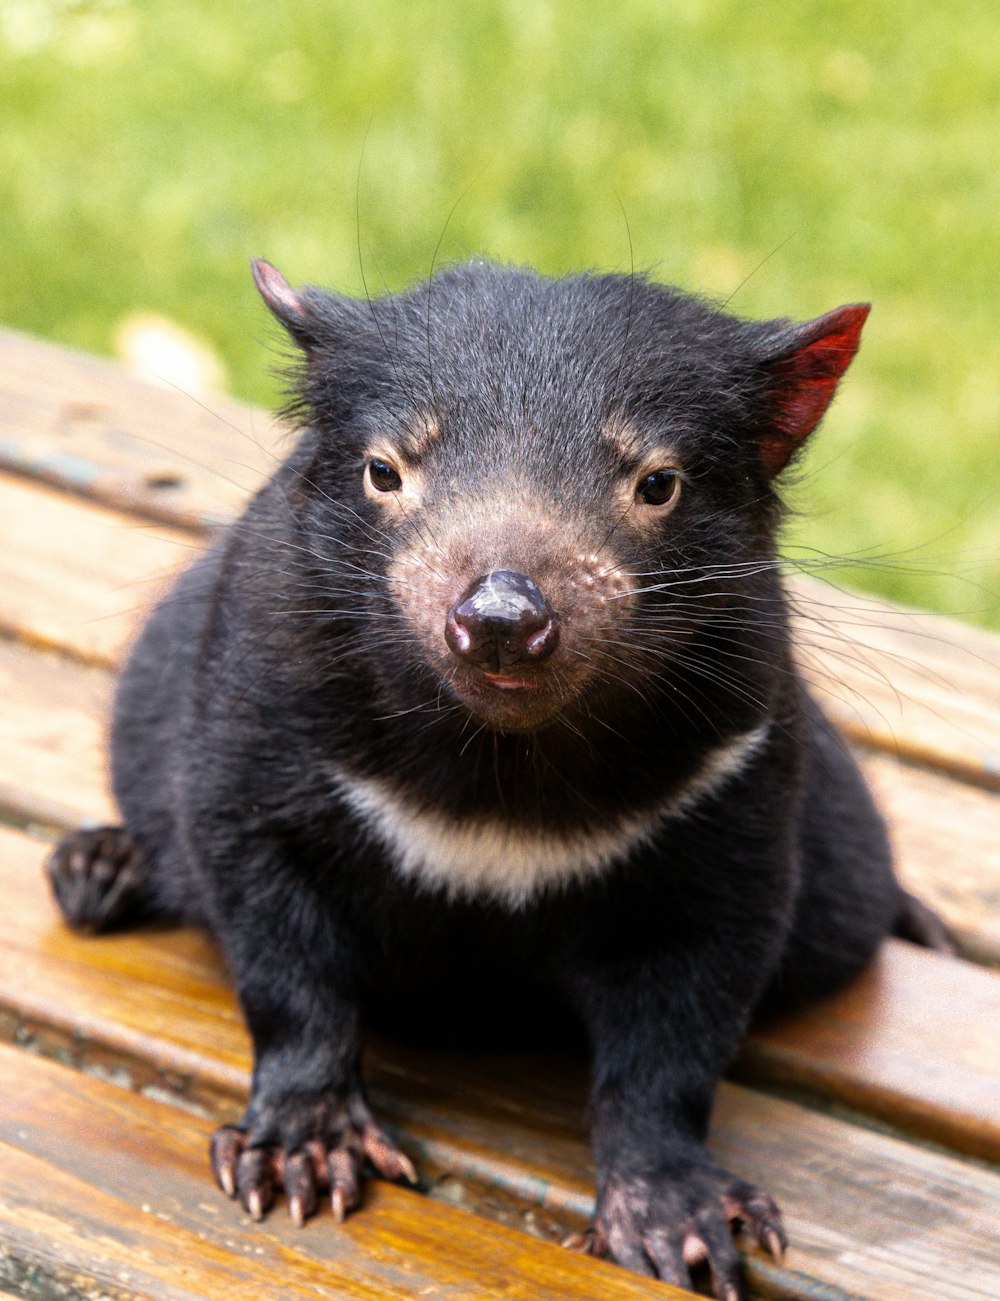 a small black animal sitting on top of a wooden bench